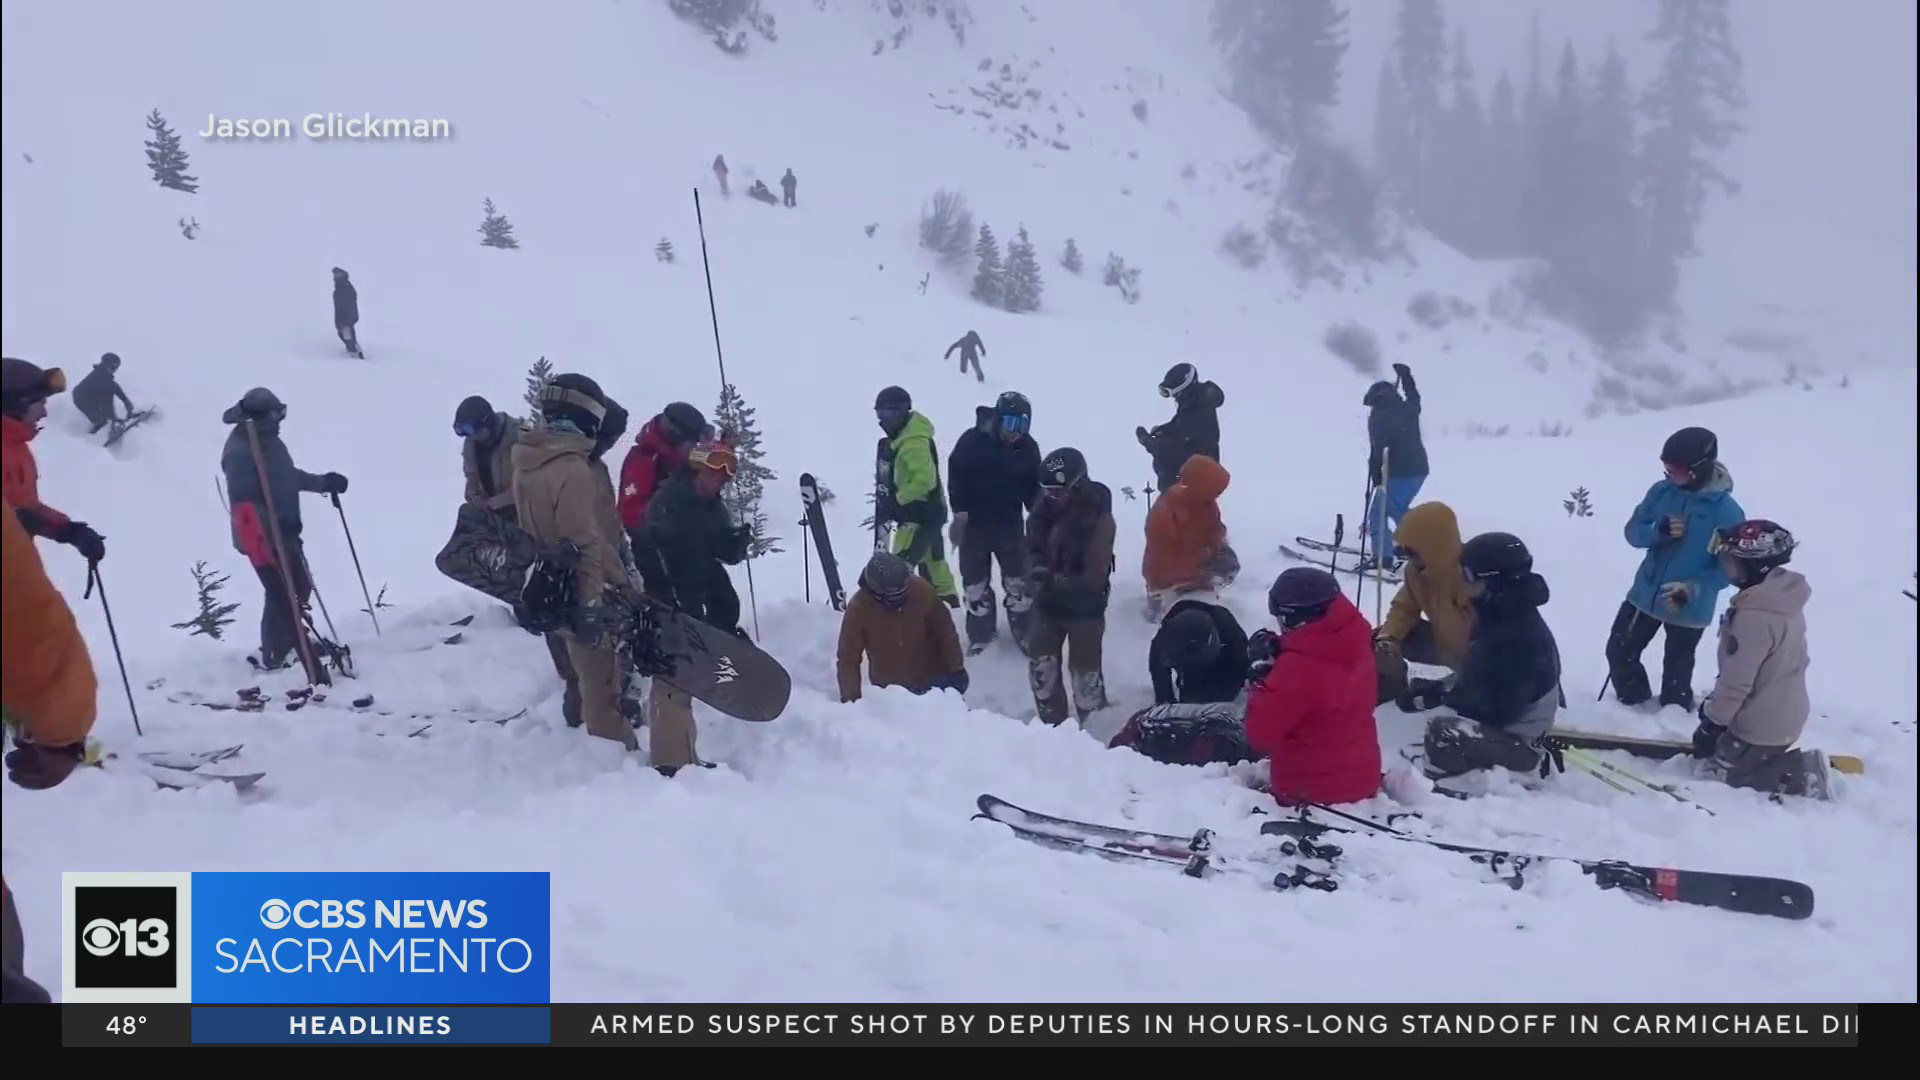 Palisades Tahoe back open day after deadly avalanche